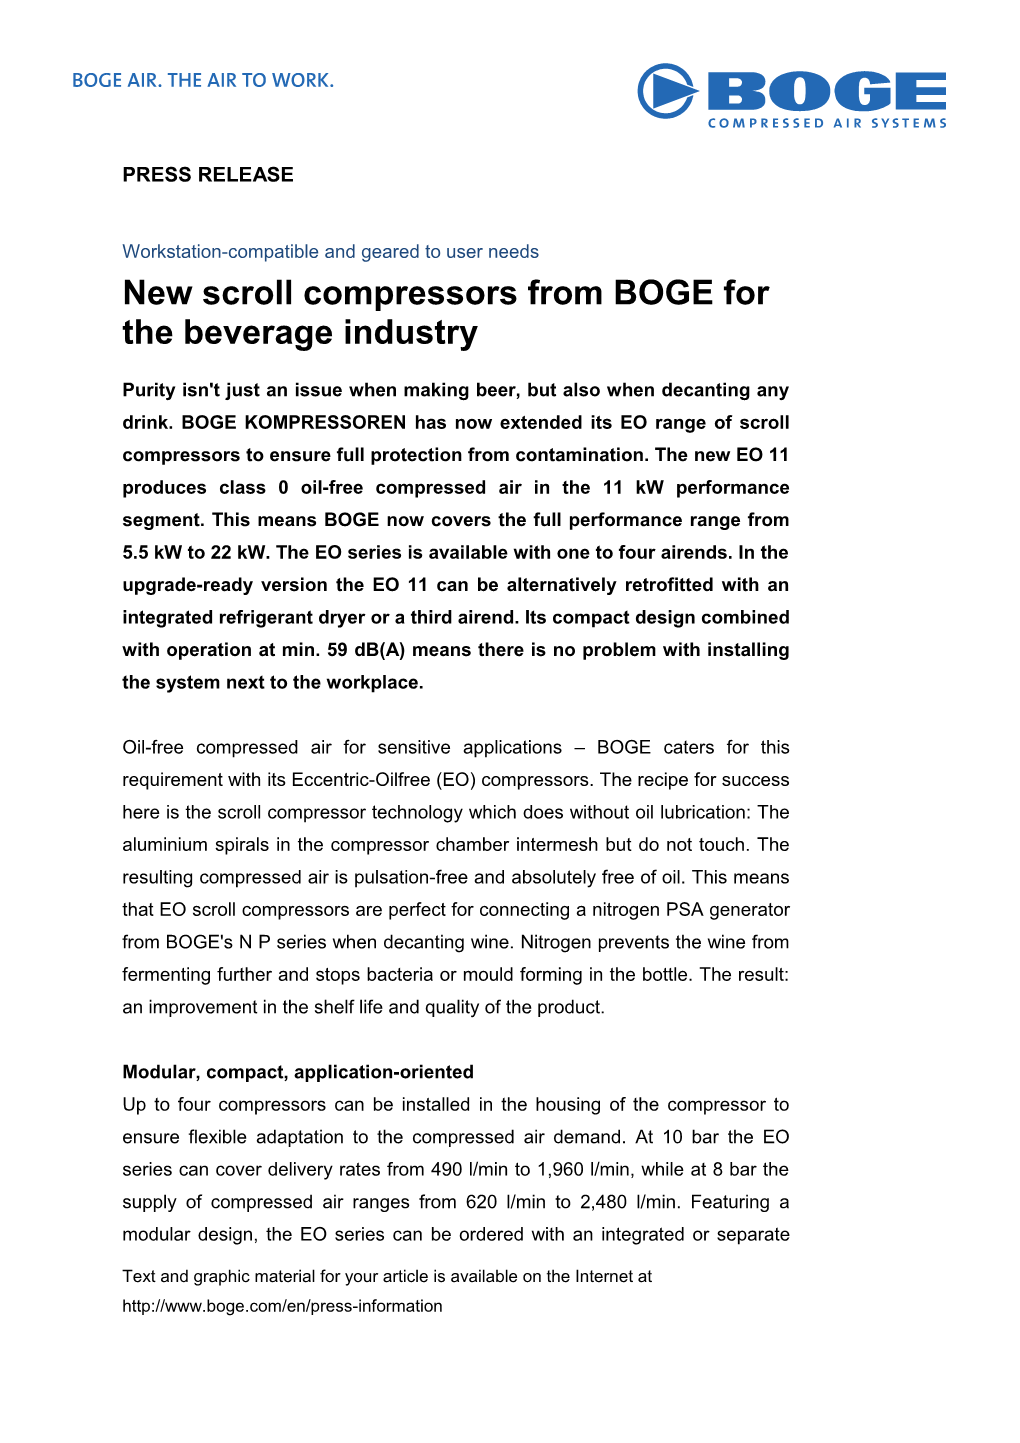 New Scroll Compressors from BOGE for the Beverage Industry